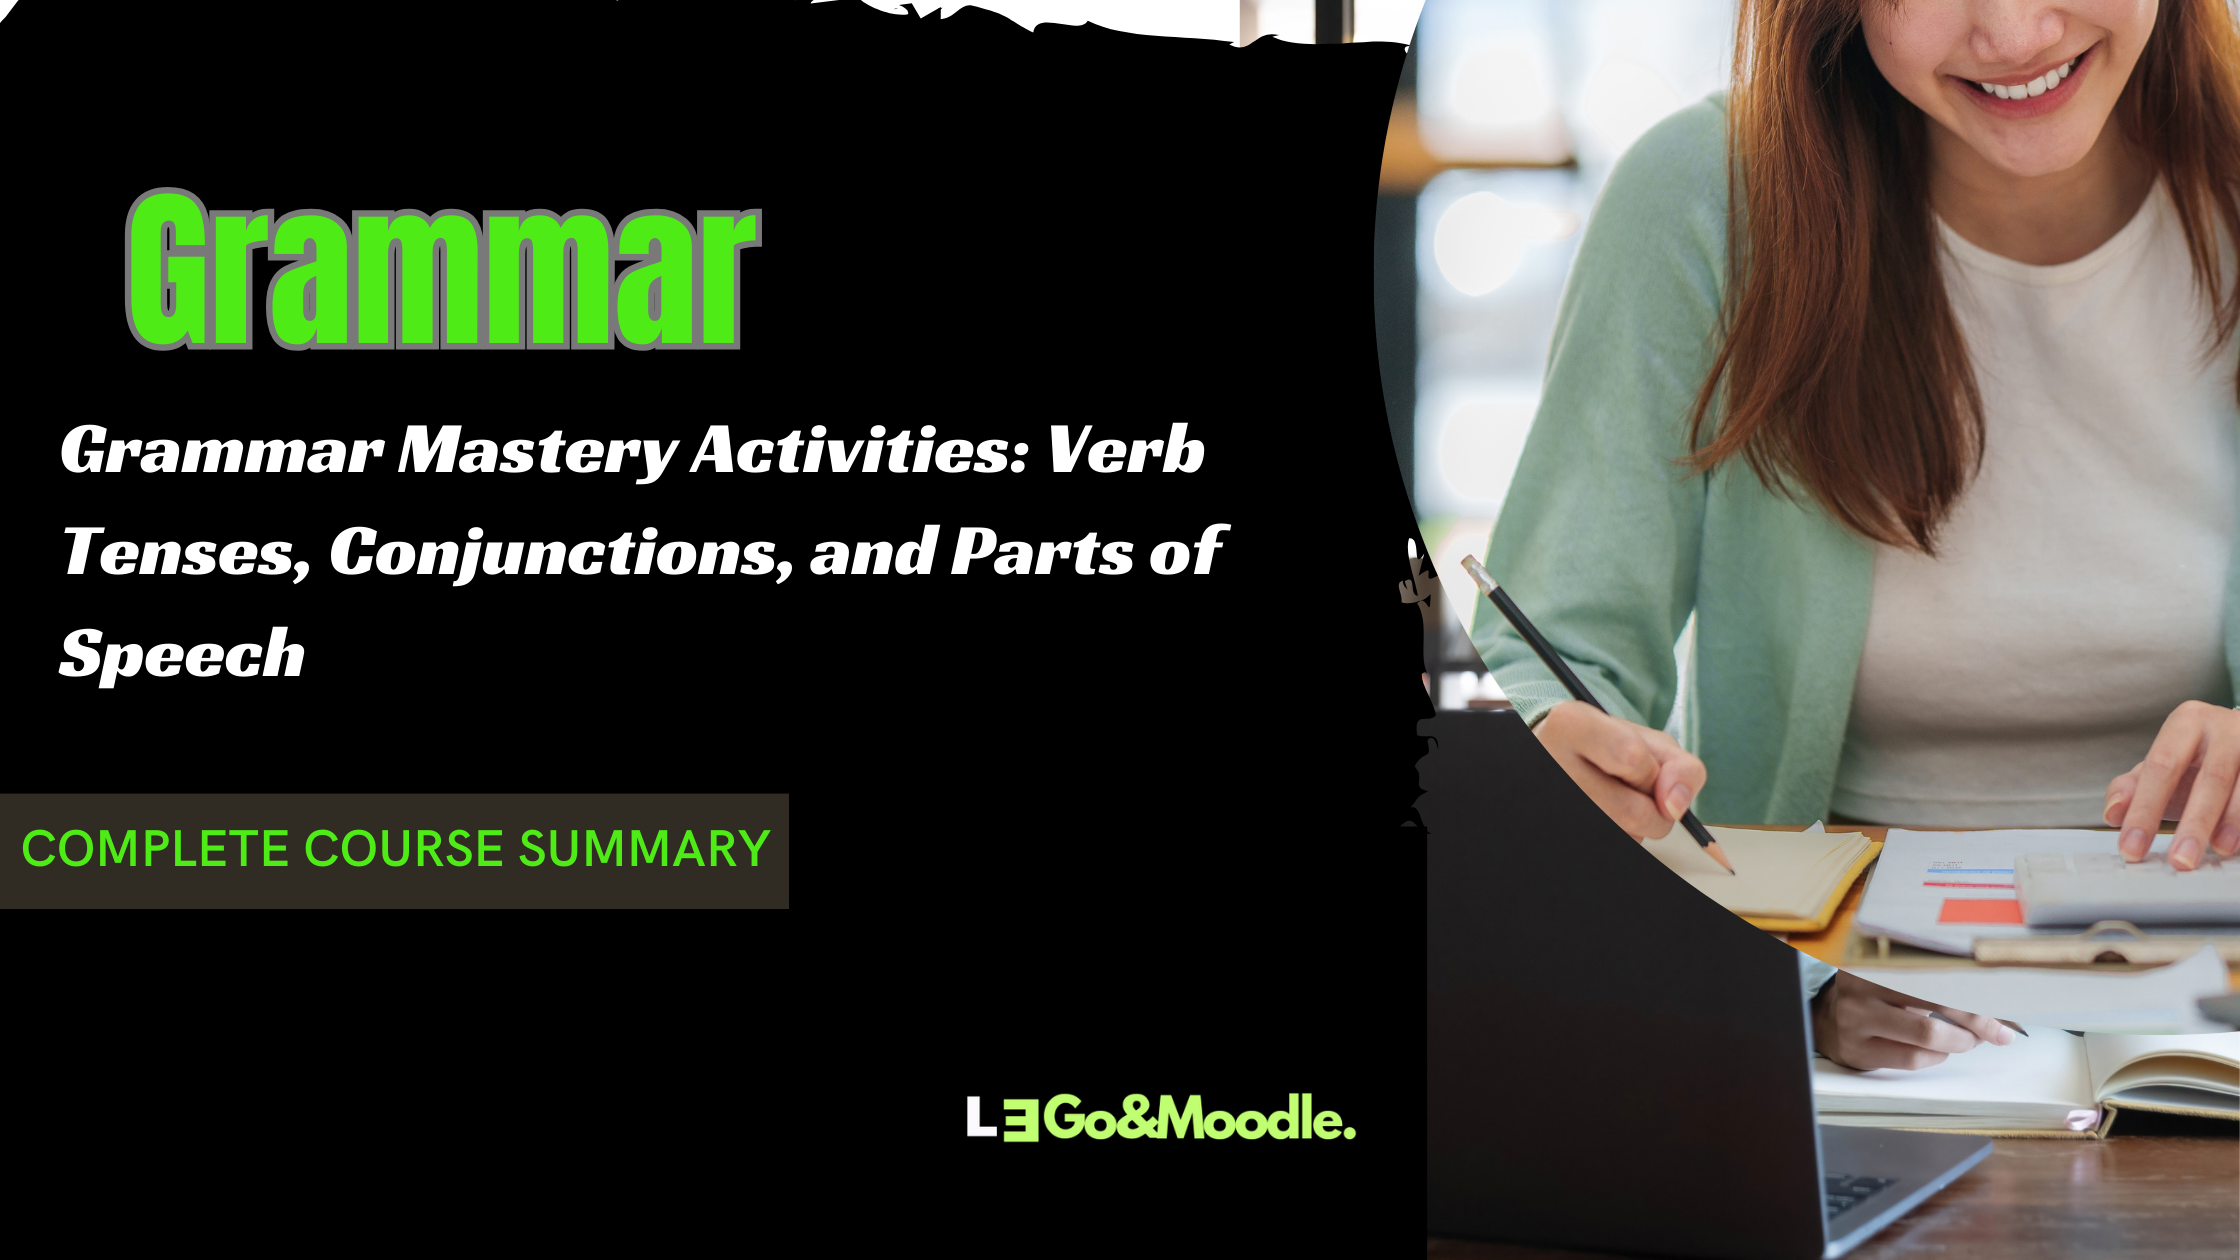 Grammar Mastery Activities: Verb Tenses, Conjunctions, and Parts of Speech